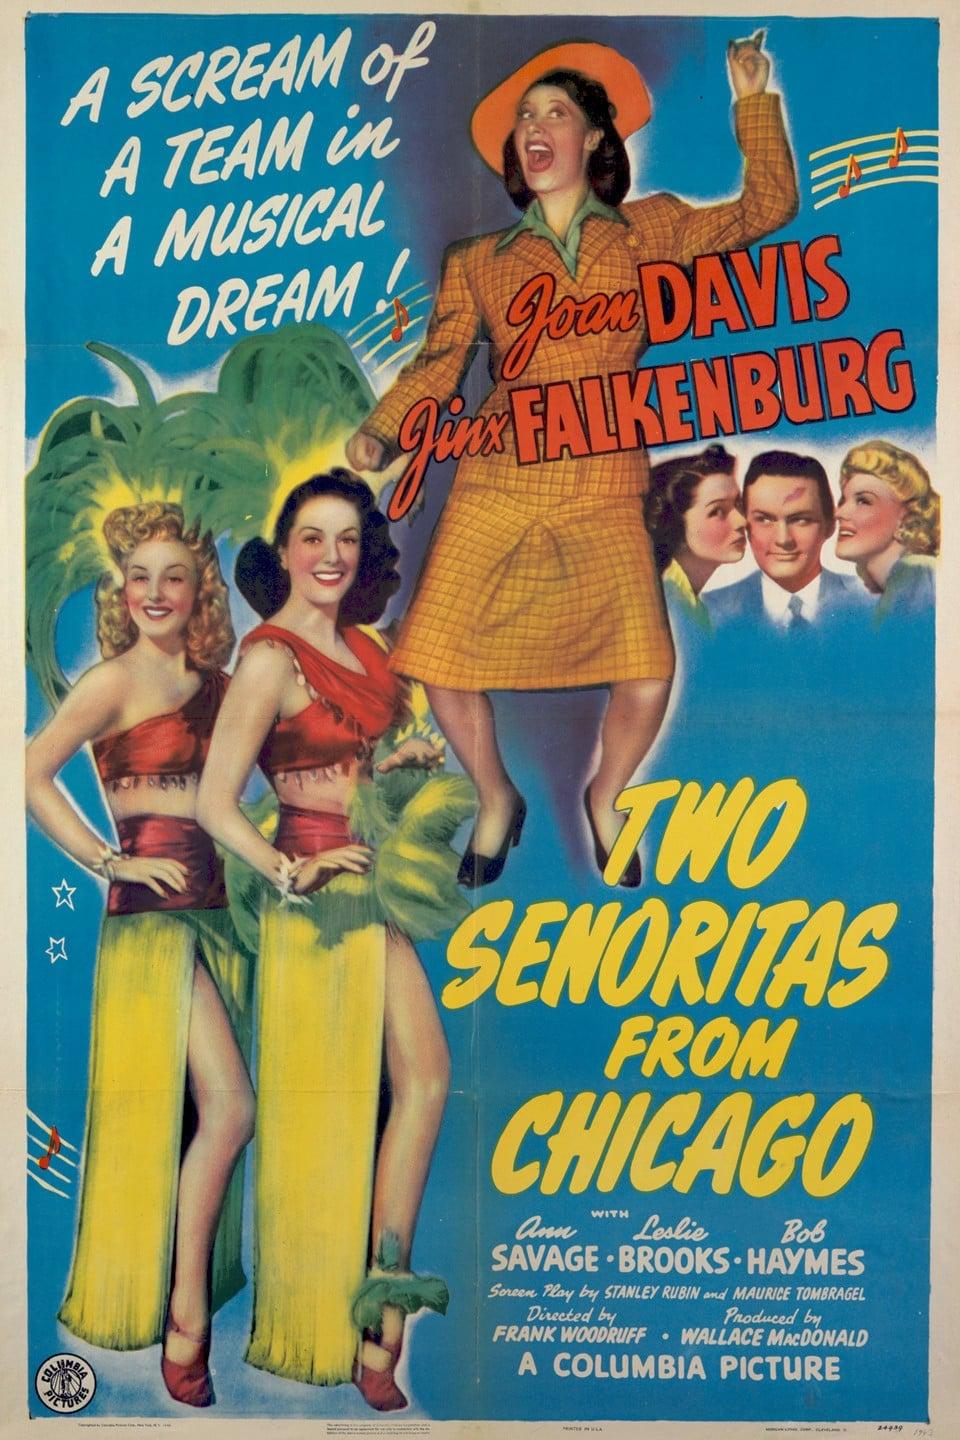 Two Señoritas from Chicago poster